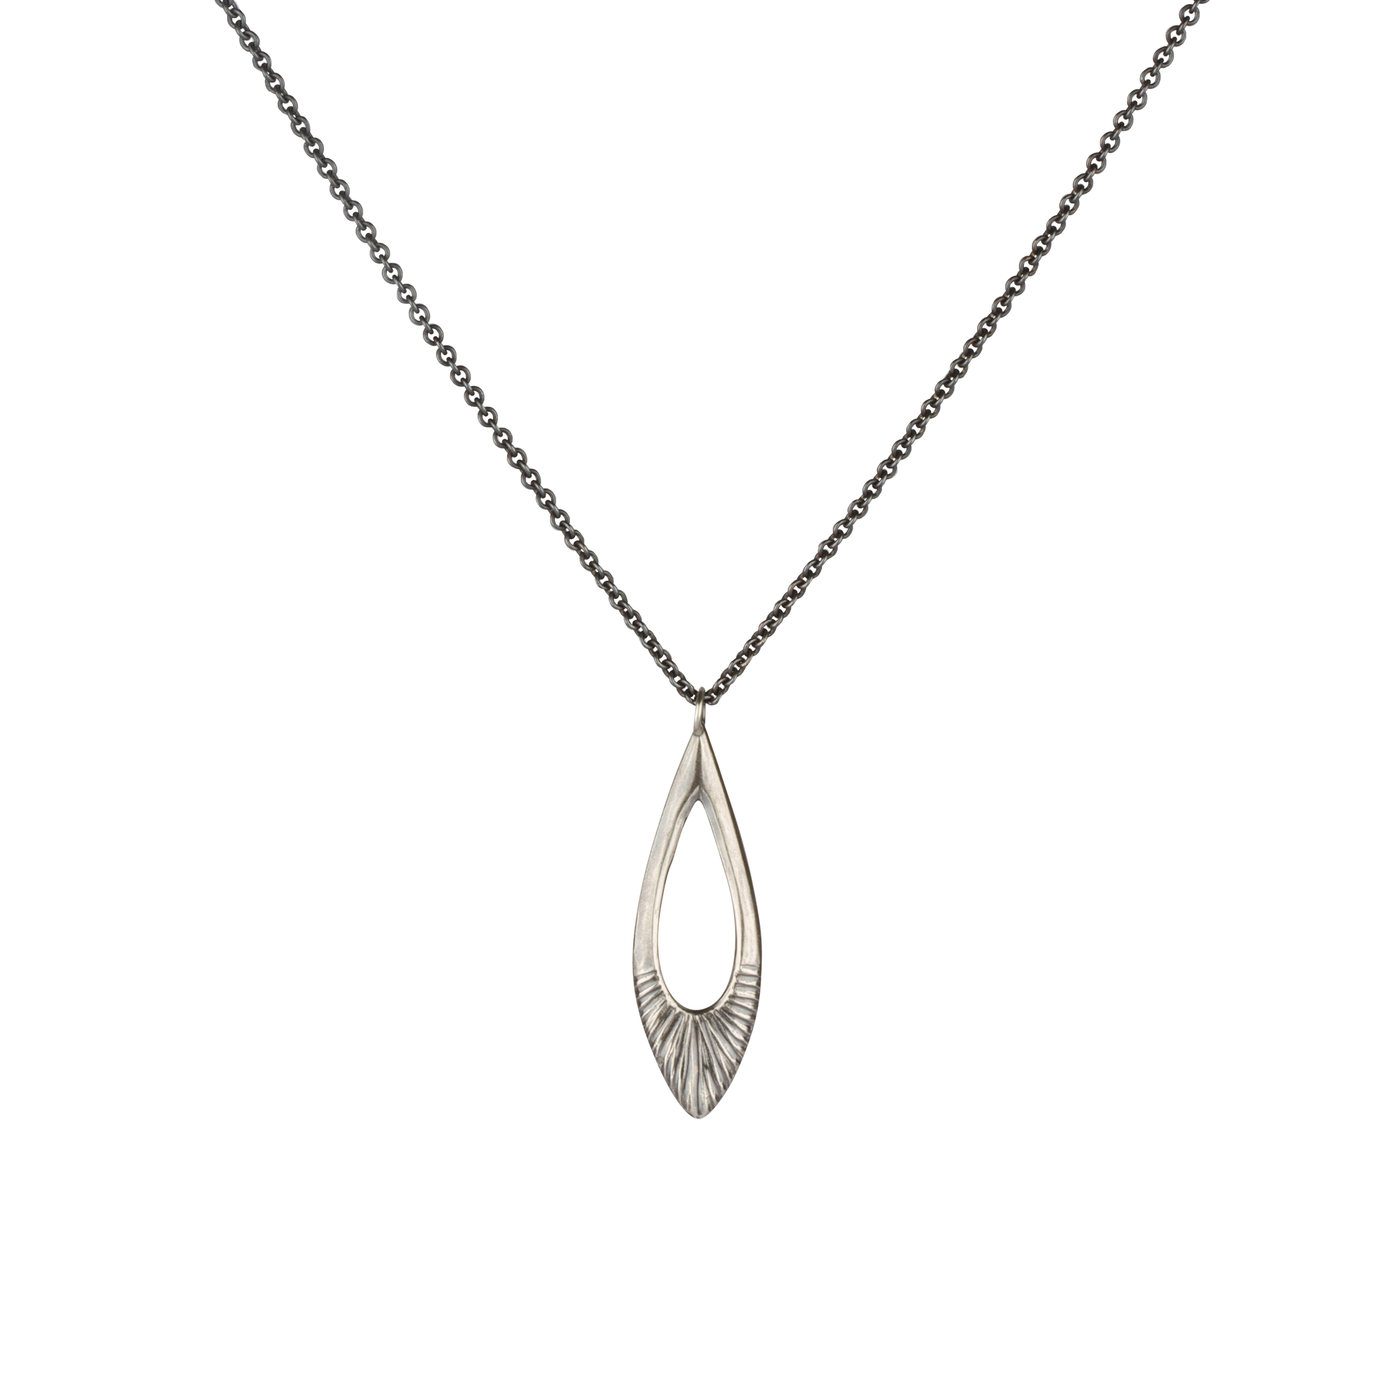 Oblong petal shaped pendant with a carved sunburst texture in oxidized sterling silver on a white background